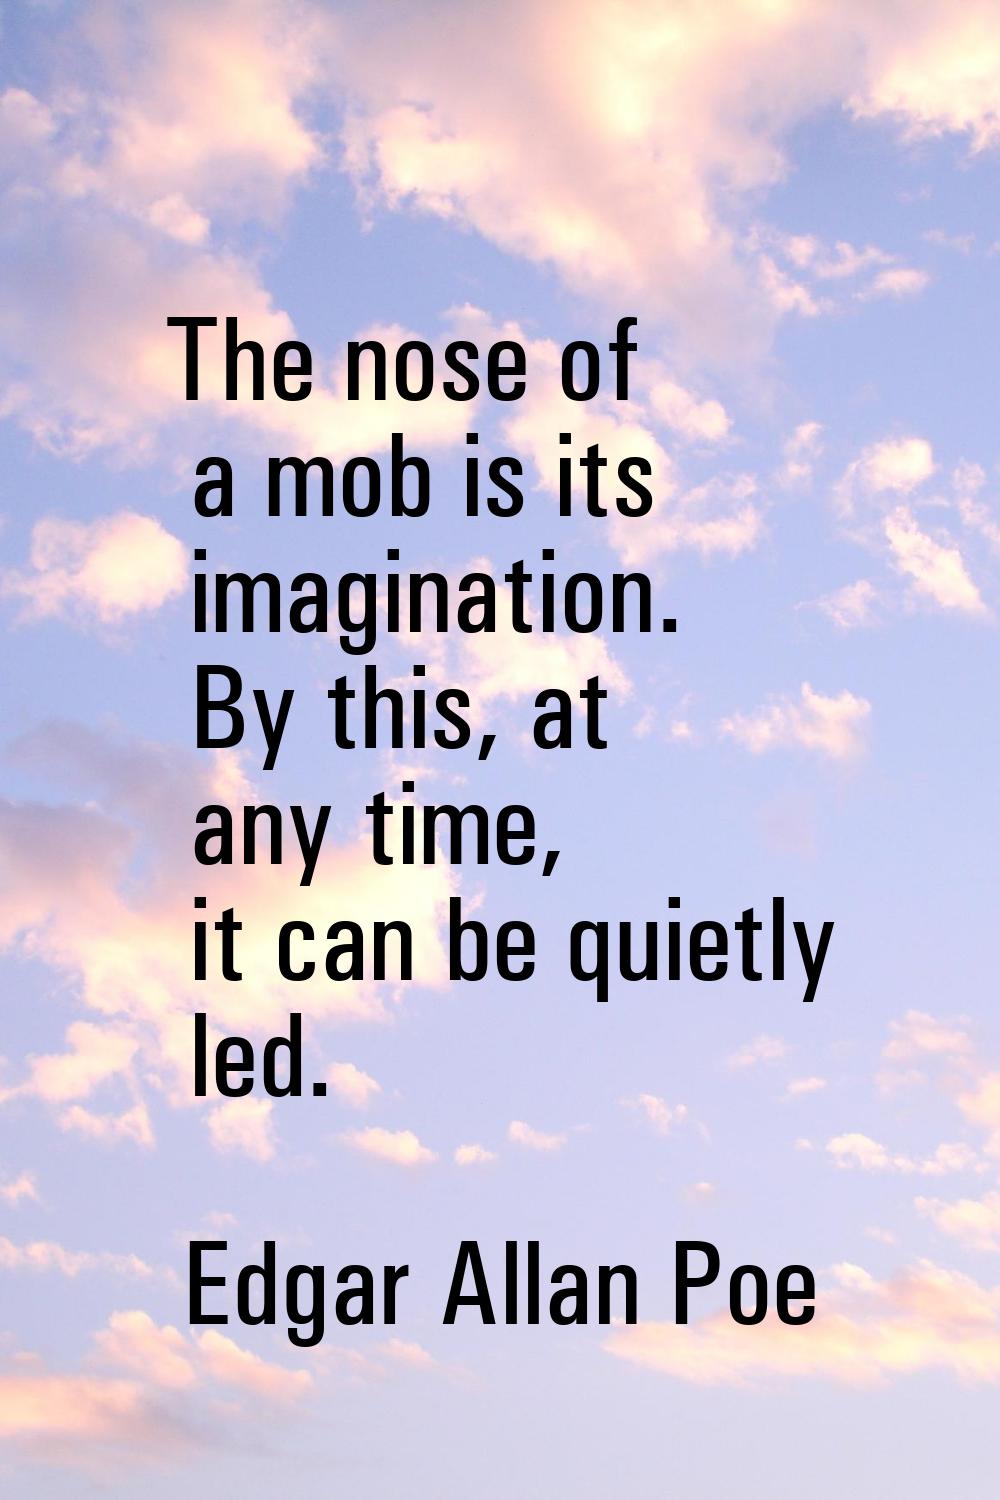 The nose of a mob is its imagination. By this, at any time, it can be quietly led.